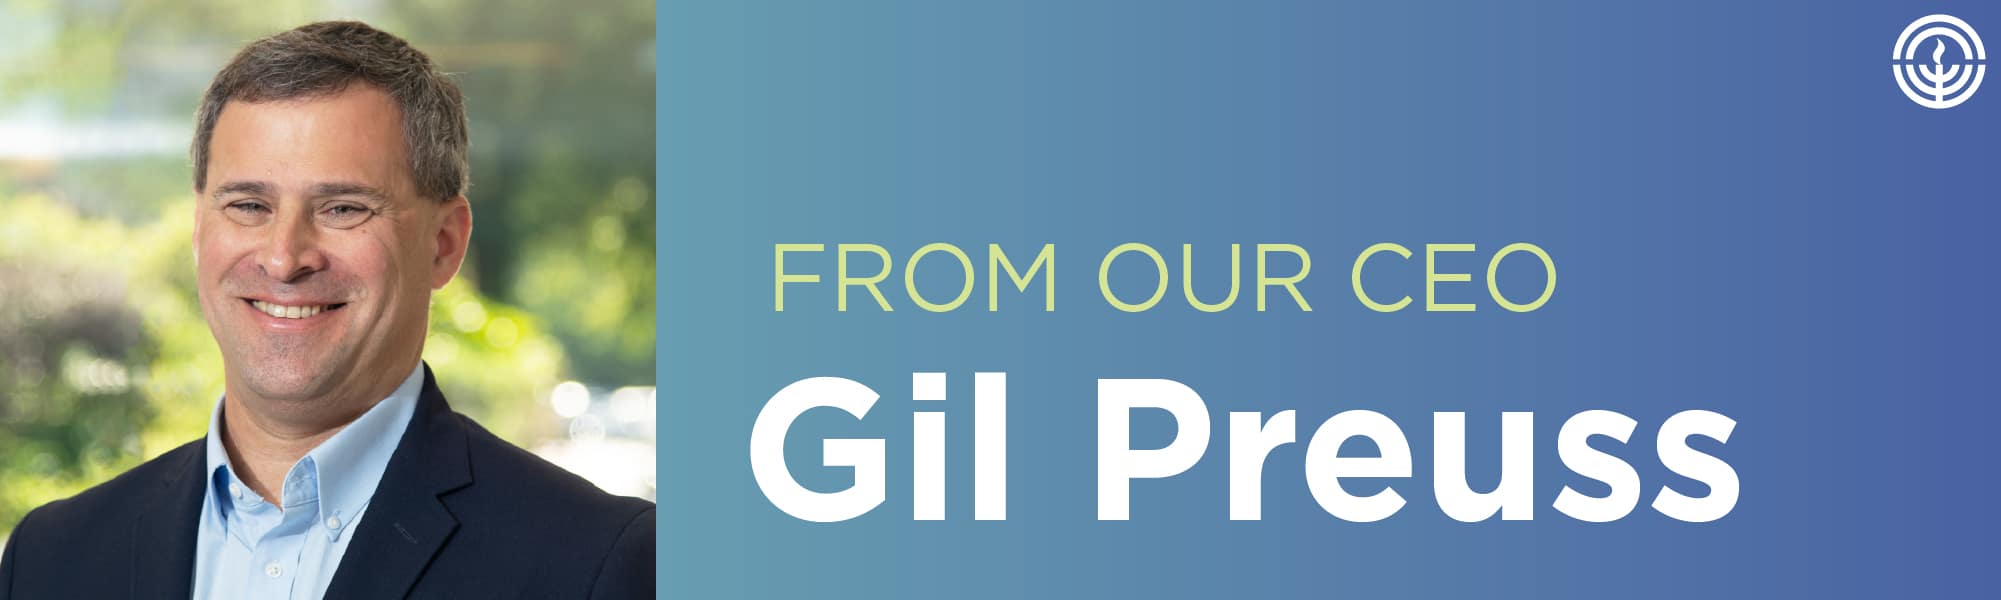 Weekly Reflection – June 14, 2019: A Message from Gil Preuss